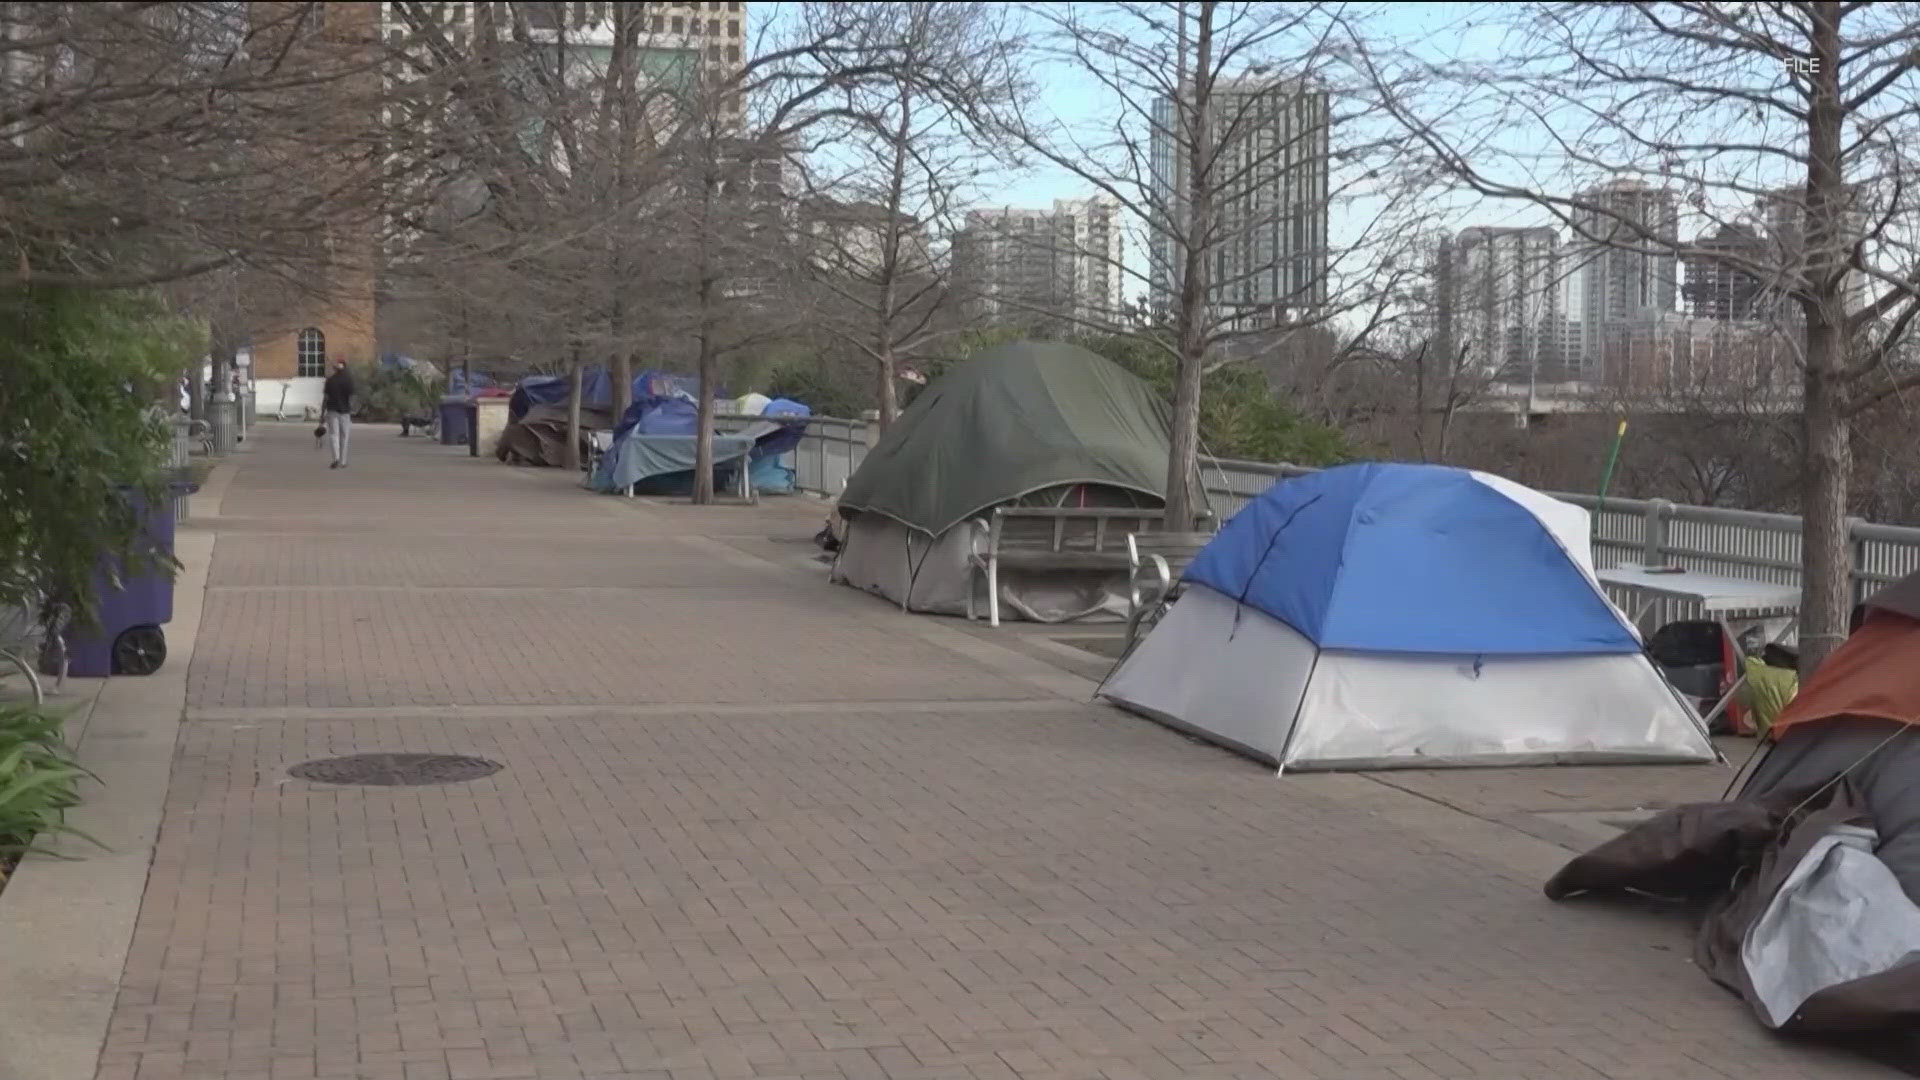 An estimated 6,200 people are currently experiencing homelessness in Austin.